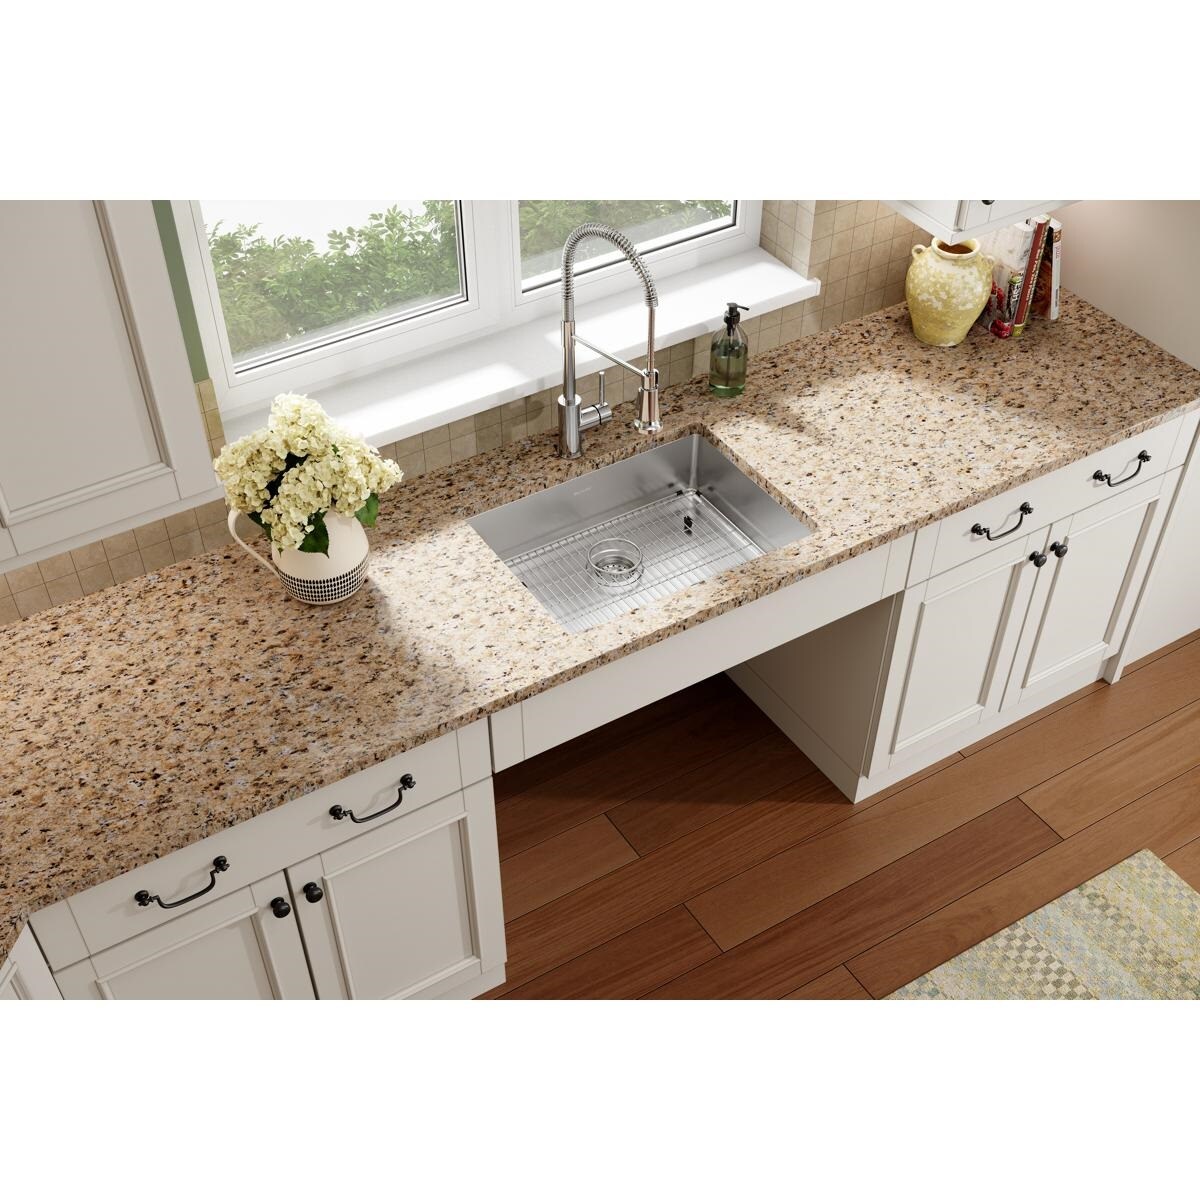 Elkay Freeport Drop-In 33-in x 22-in Stainless Steel Double Equal Bowl  1-Hole Kitchen Sink